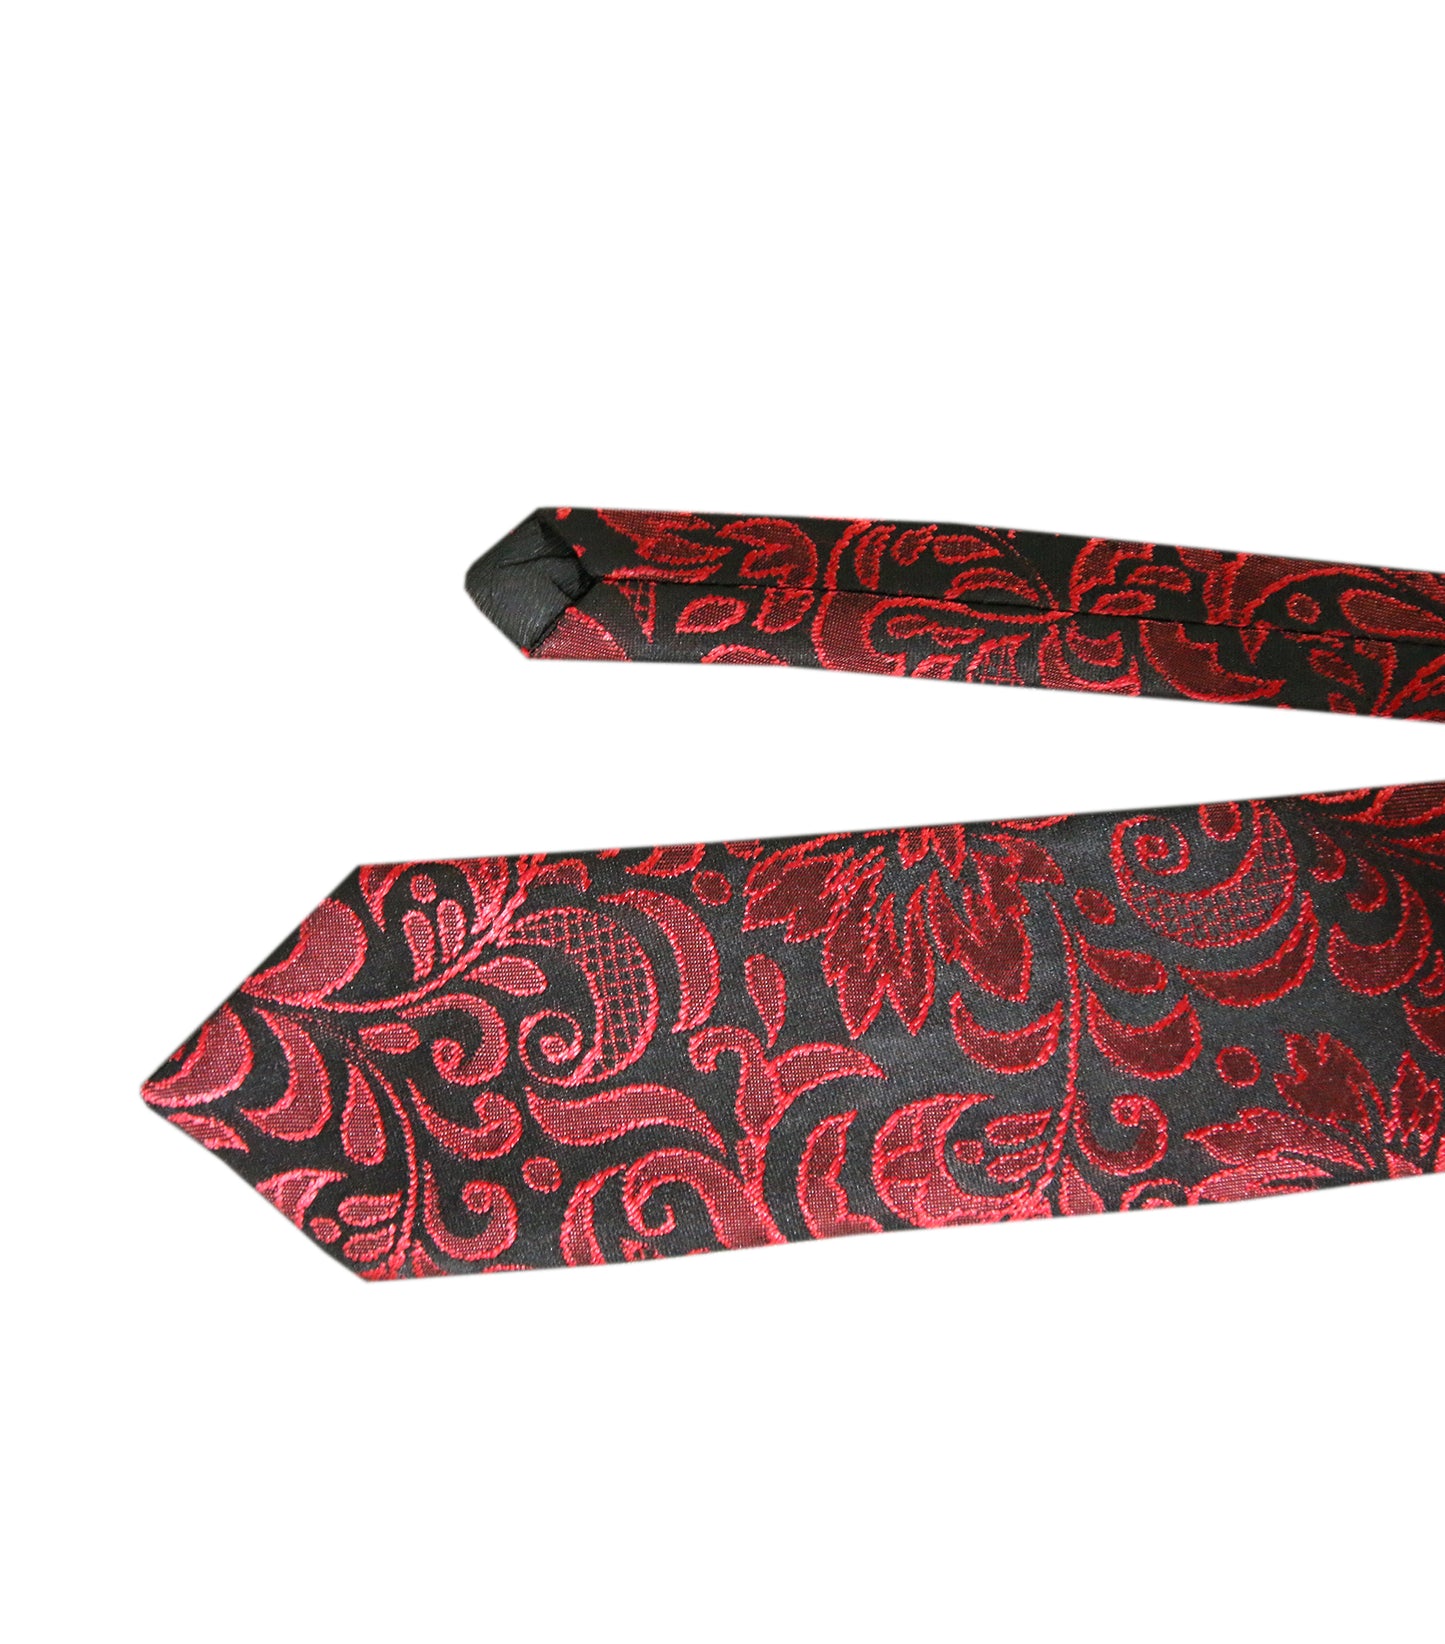 Red tie with elegant Black and Red brocade Vc200 | high-quality necktie